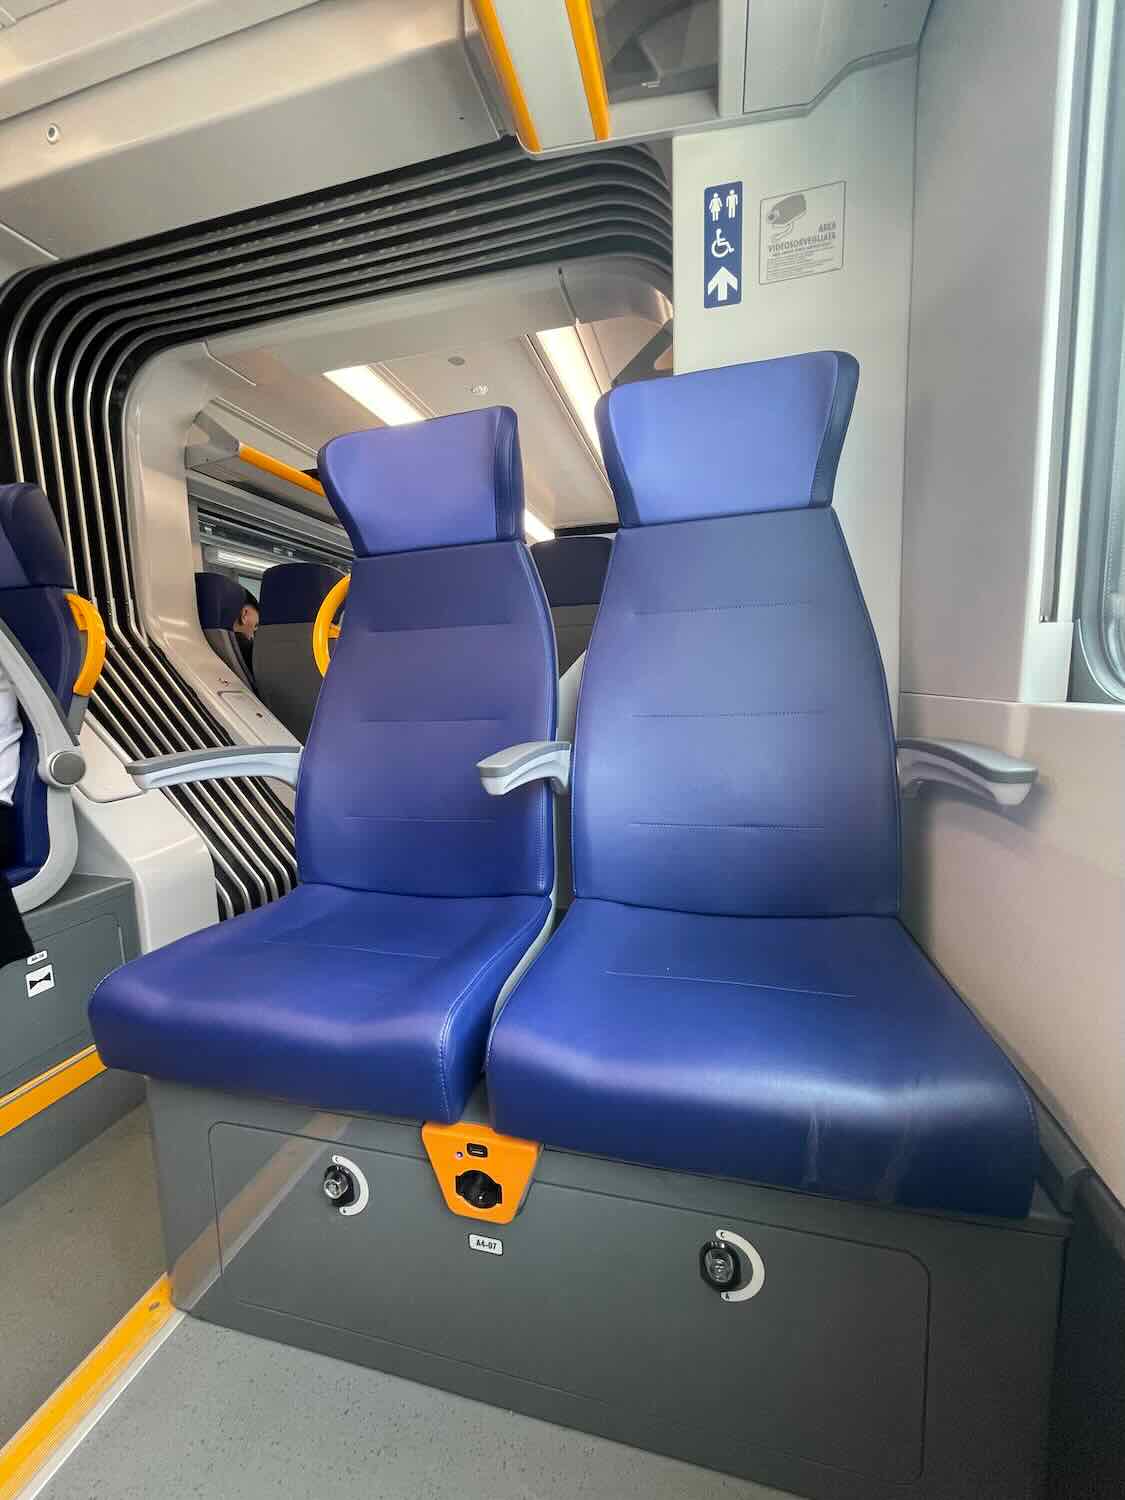 A photo of two blue train seats inside a Trenitalia train in Bari, Italy. The seats are positioned side by side with a modern design, featuring armrests and a small orange panel with a power outlet at the base. The interior of the train is clean and well-lit, with signage indicating the location of accessible facilities.